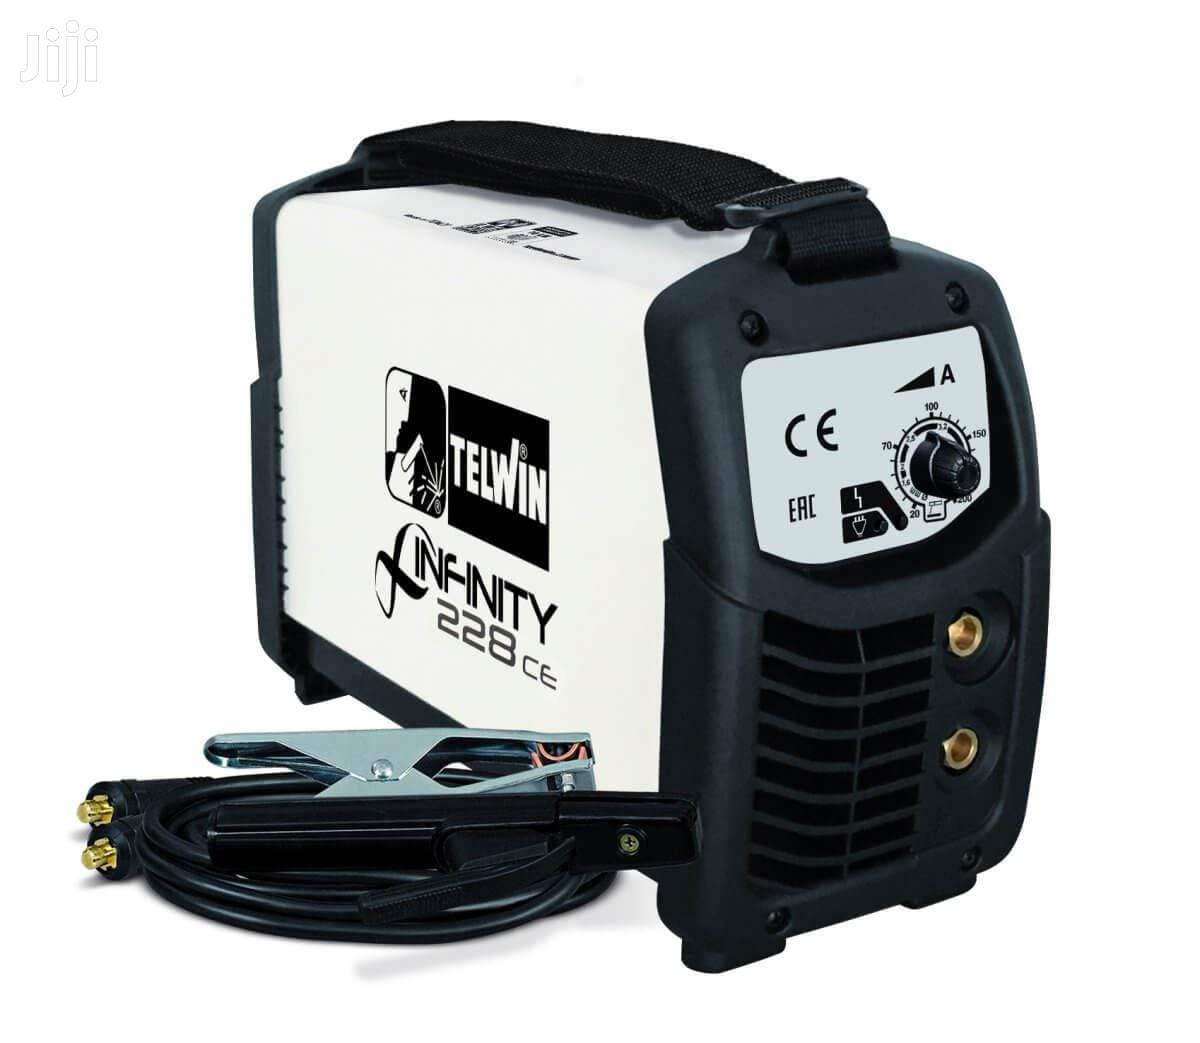 Telwin MMA Welding Machine 230V ACX - INFINITY 228 CE | Supply Master | Accra, Ghana Tools Building Steel Engineering Hardware tool